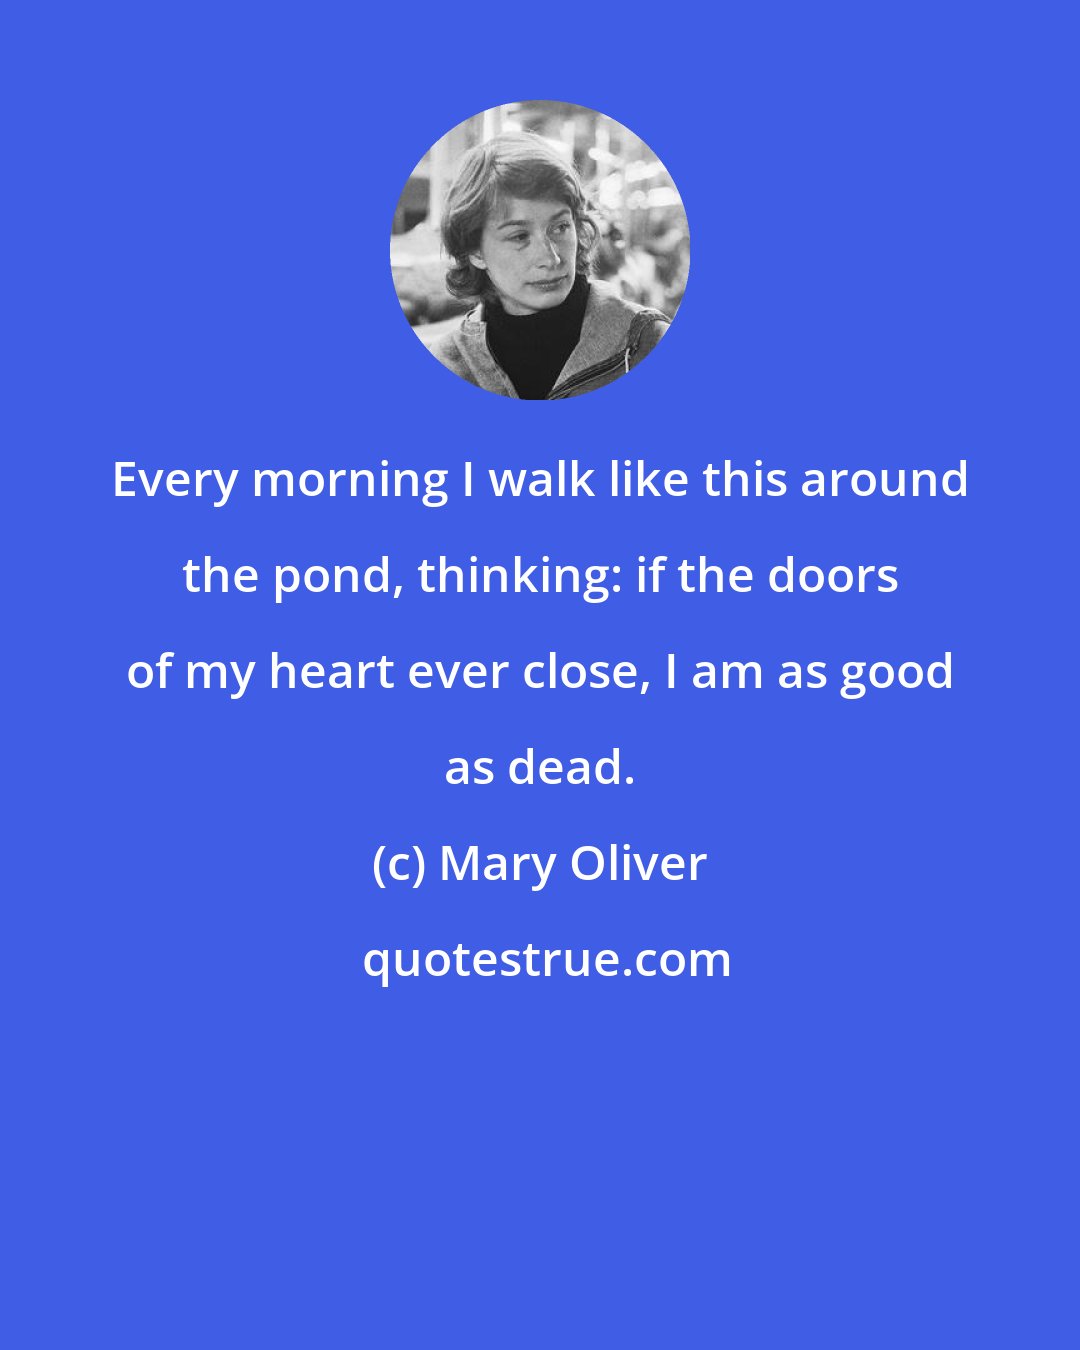 Mary Oliver: Every morning I walk like this around the pond, thinking: if the doors of my heart ever close, I am as good as dead.